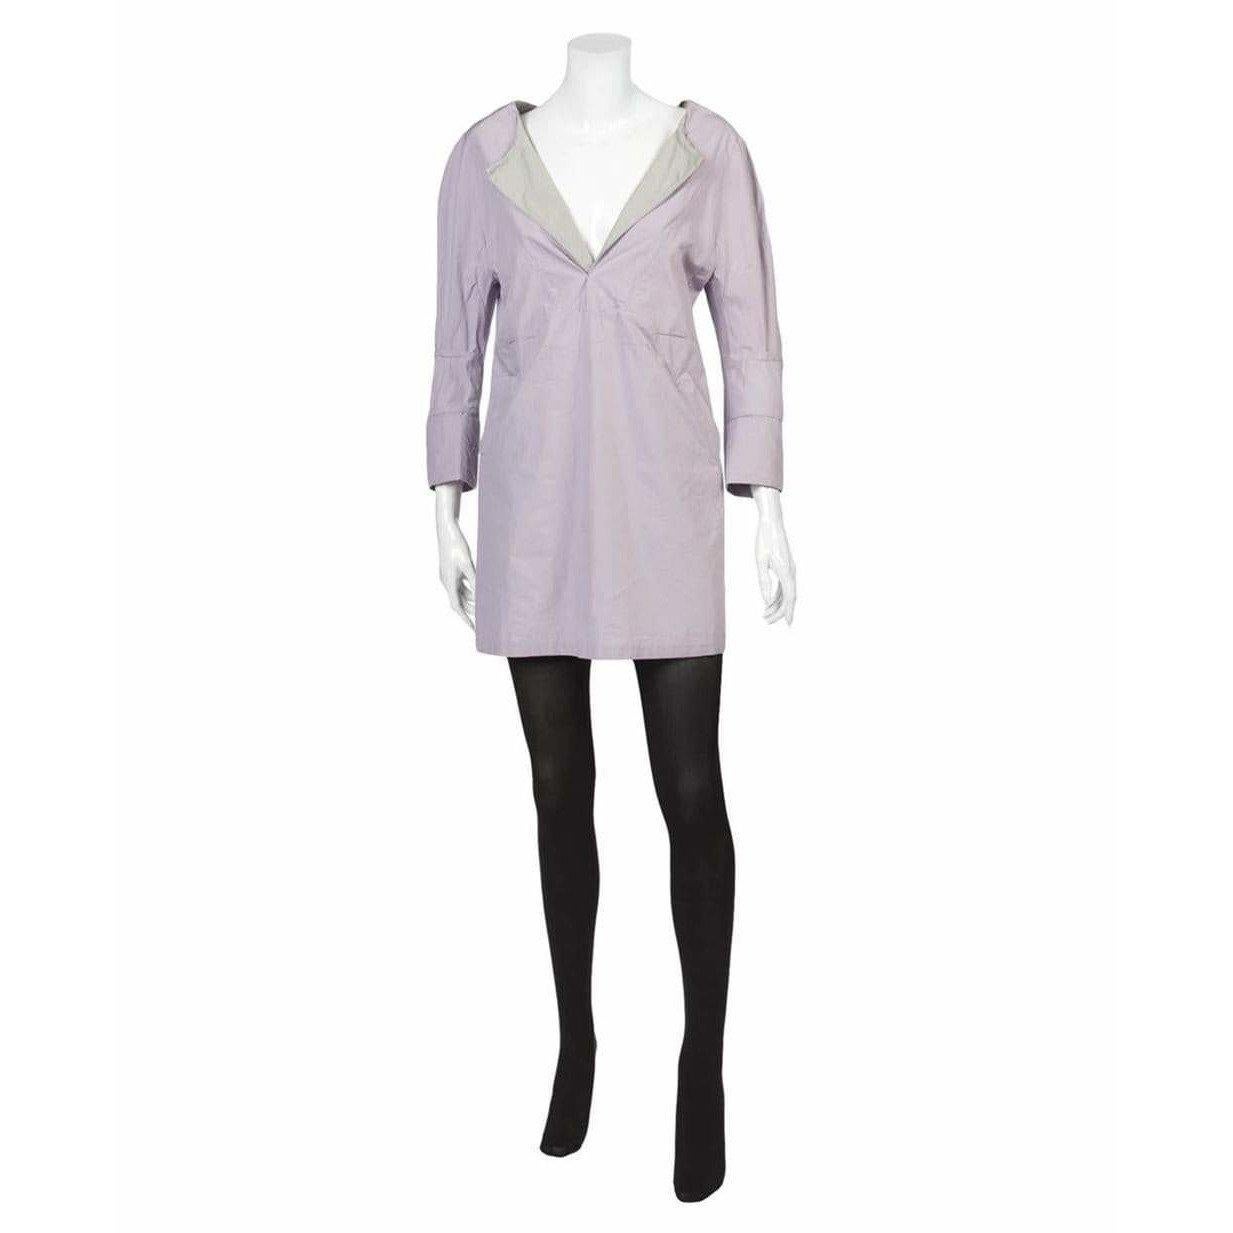 Lovely in lilac! This shirt dress from vintage Undercover features contrasting grey lapels, 3/4 length folded sleeves, two slanted front pockets, and a double back vent. This comfortable 100% cotton dress can also be styled as a tunic.